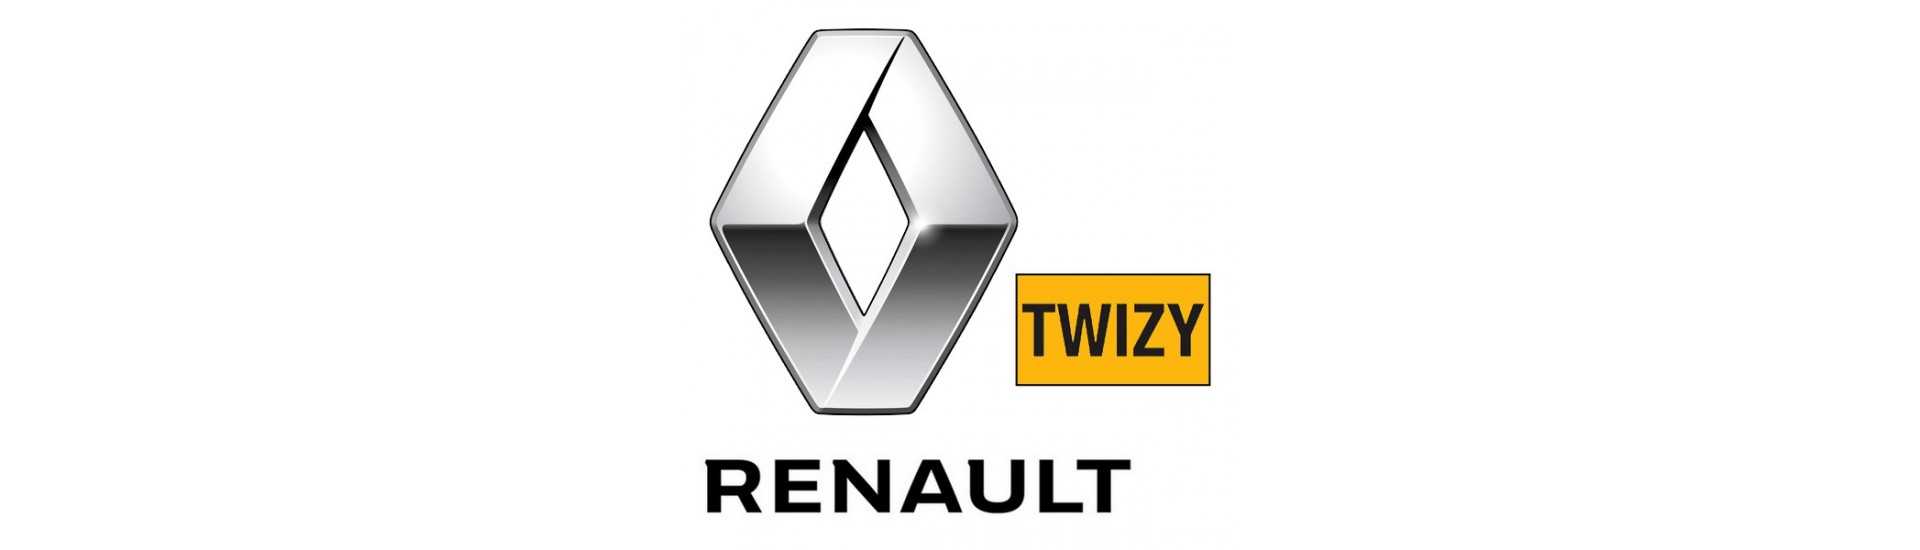 Door stop at the best price for car without a permit Renault Twizy